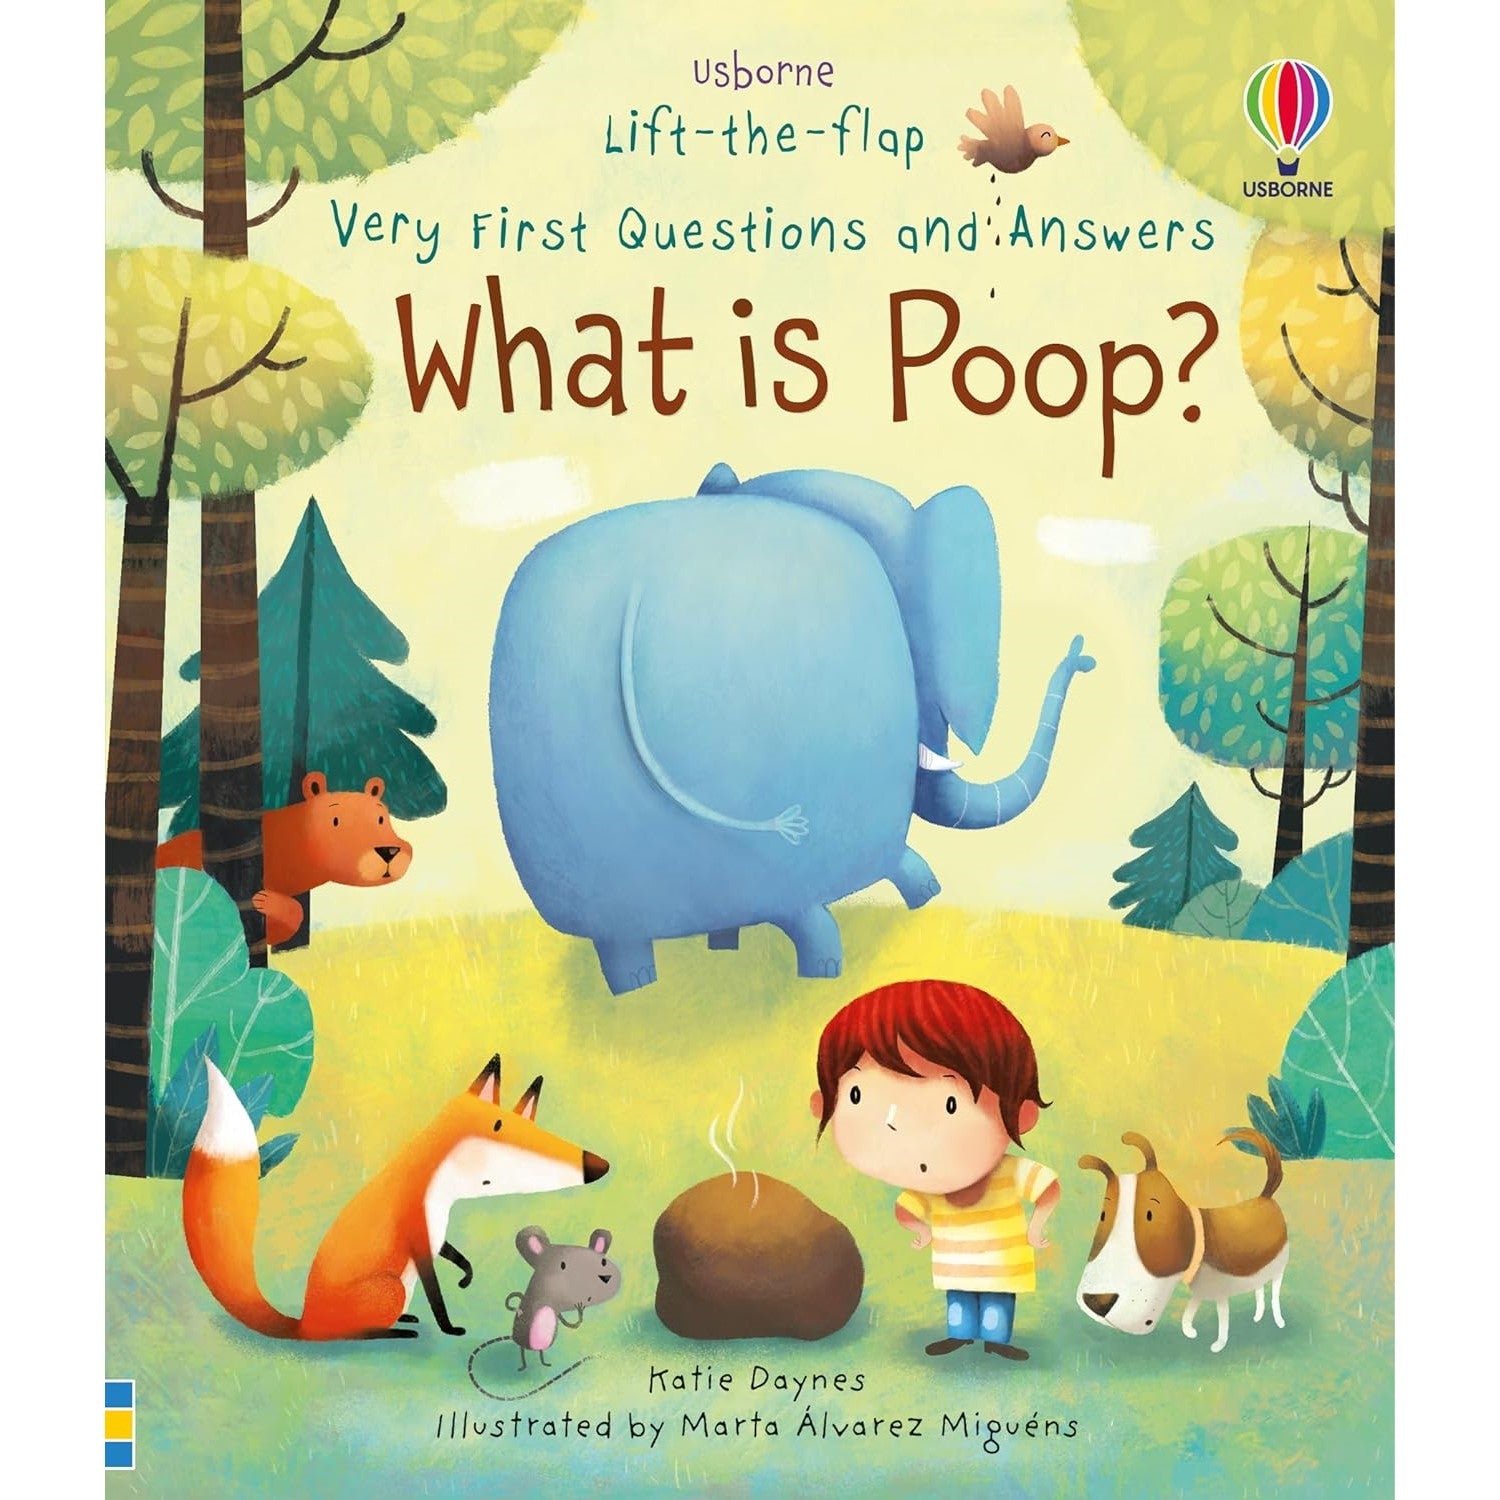 Very First Questions and Answers What is Poop?